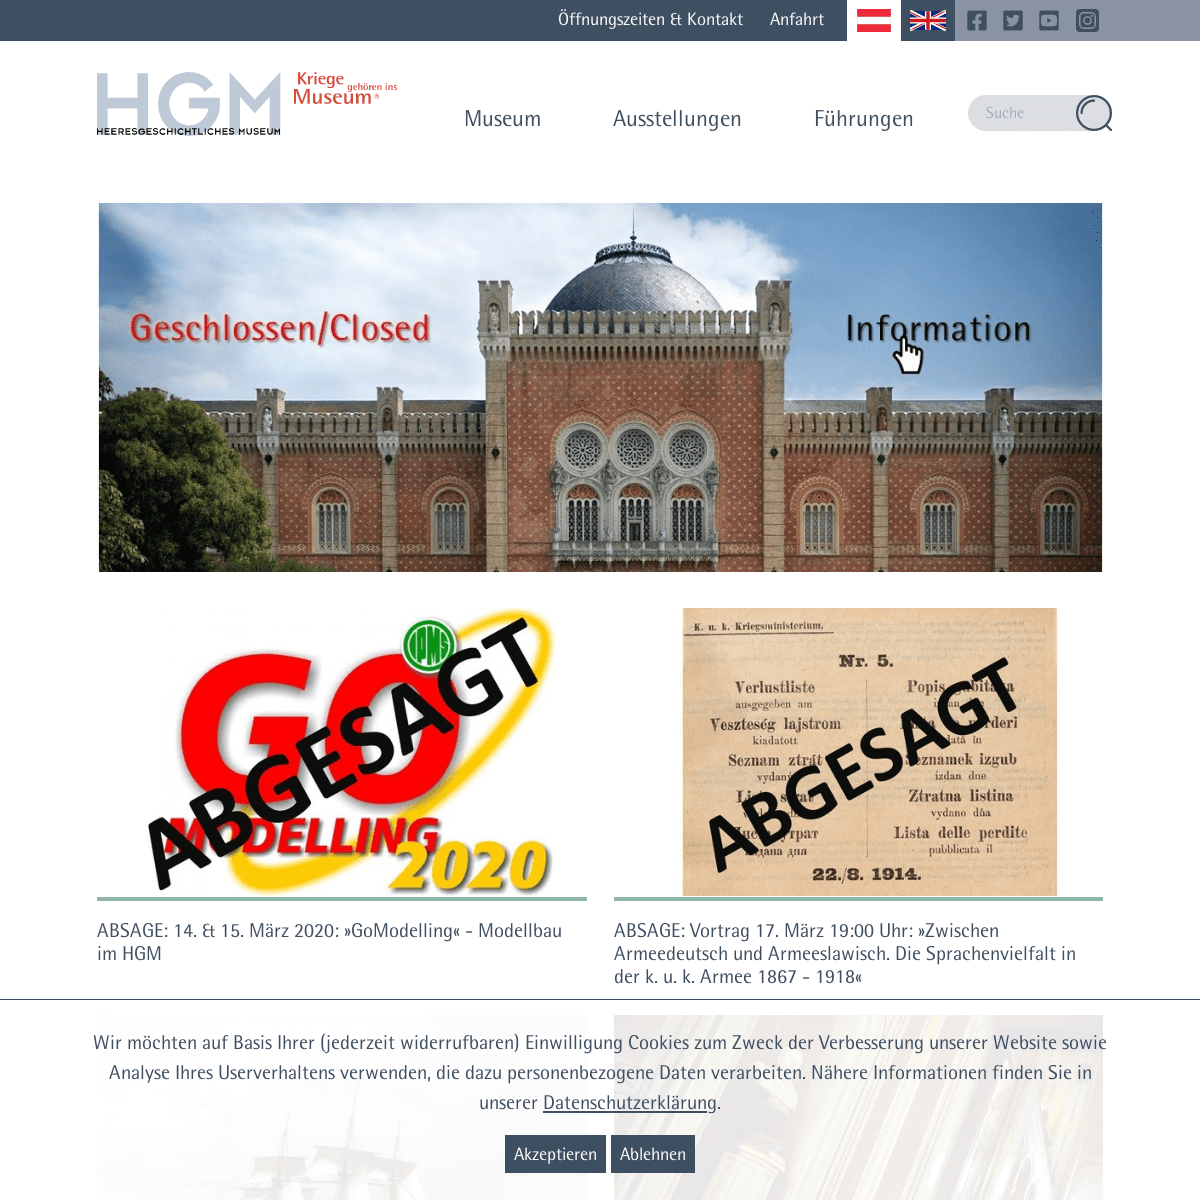 A complete backup of hgm.at